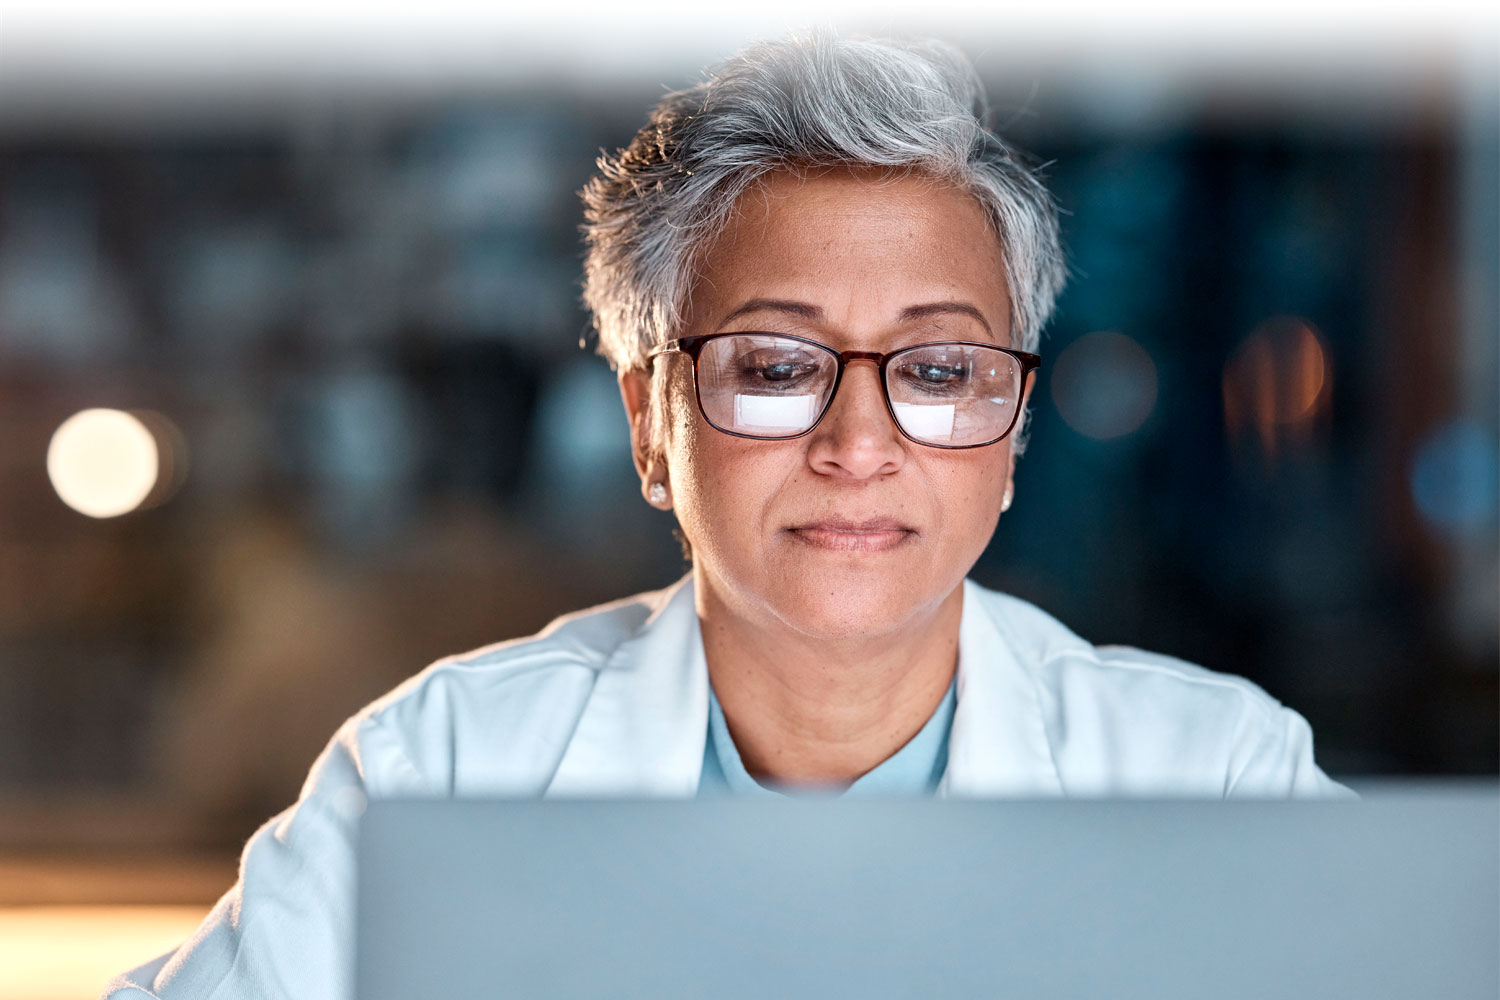 Healthcare professional looking at her computer screen